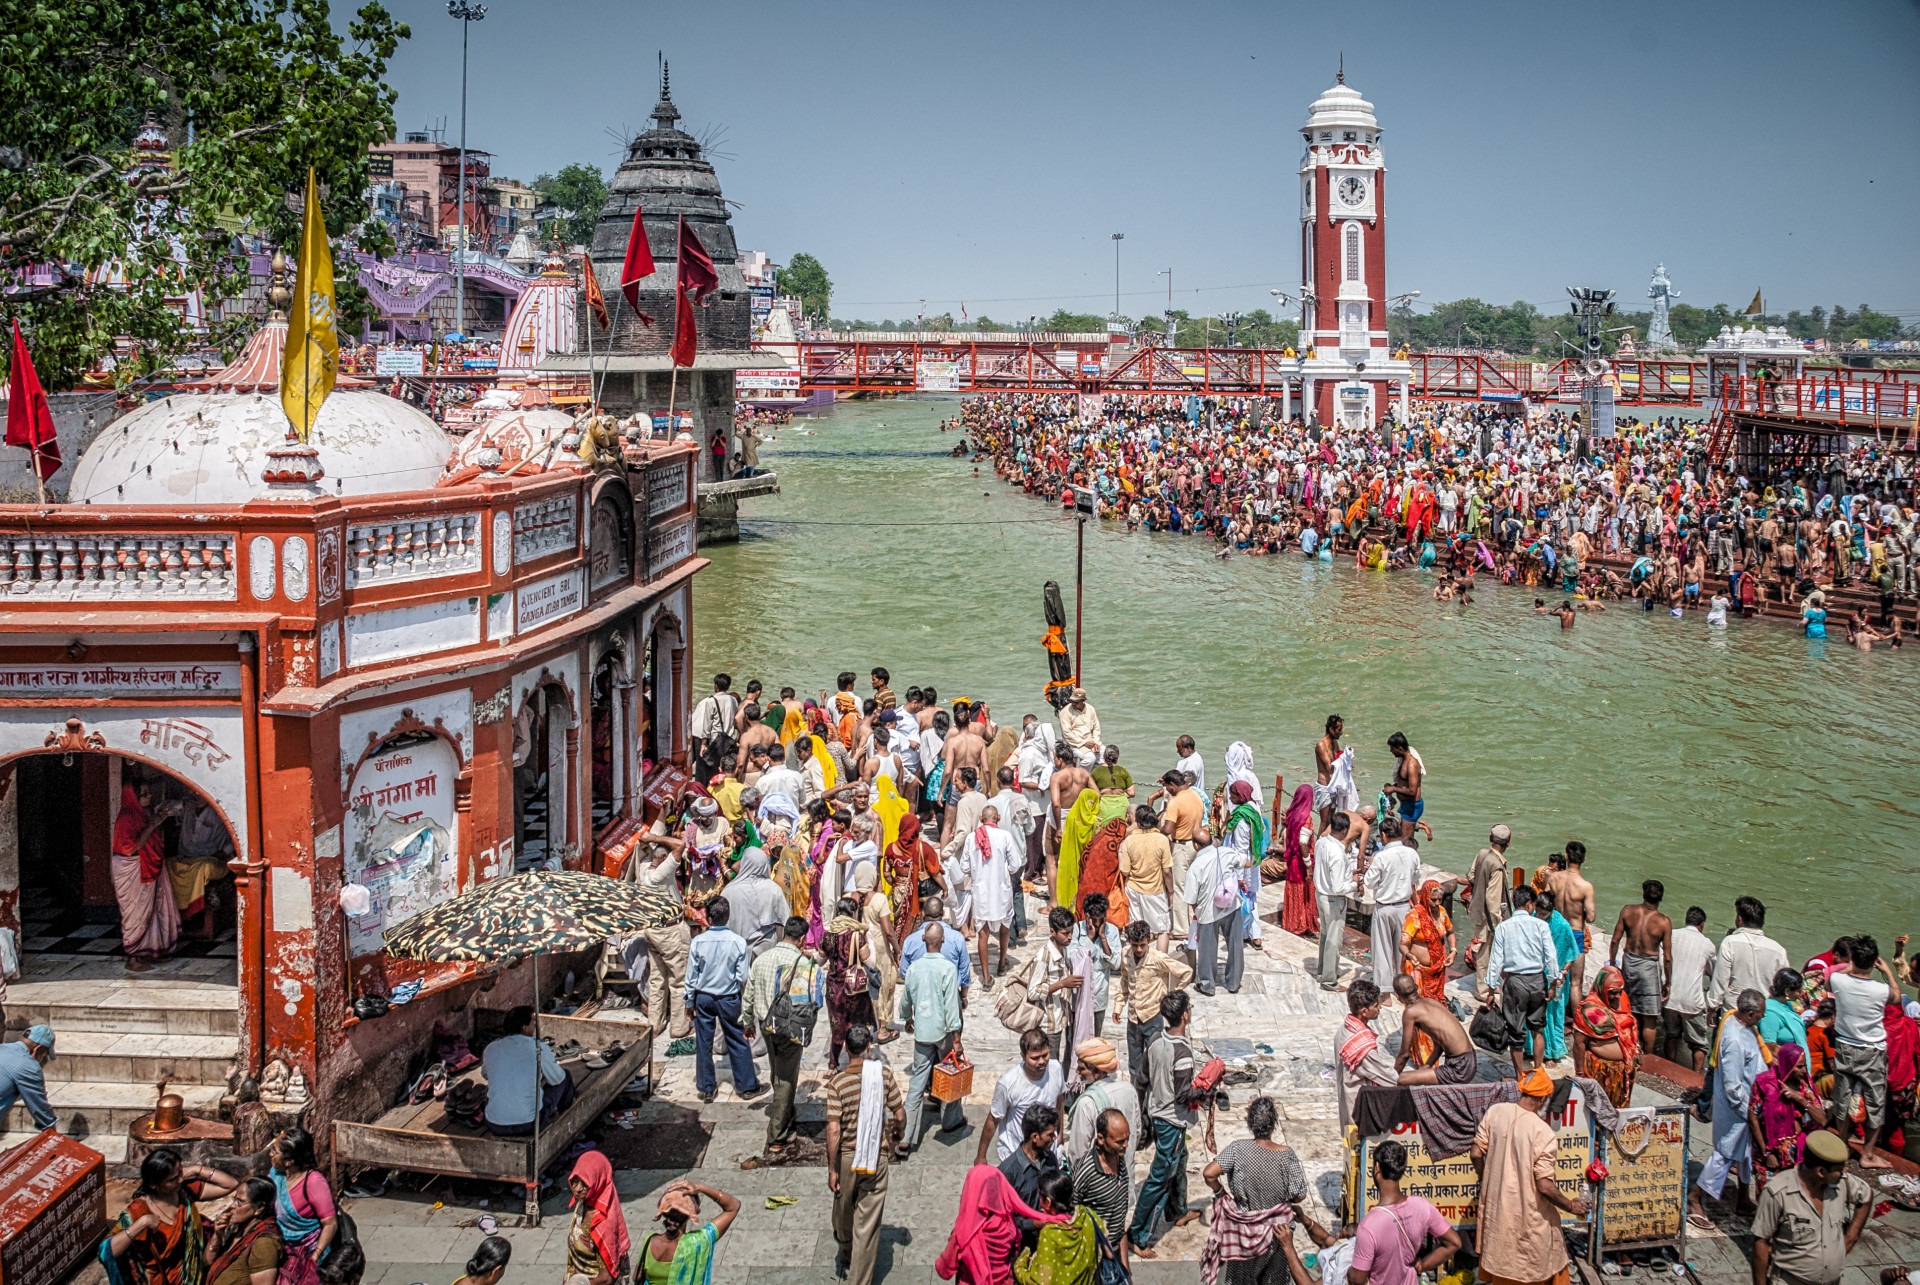 This is the largest religious festival in the world, gathering around 100 million people on each occasion. It takes place every 12 years in the city of Sangam.<p><a href="https://www.msn.com/en-in/community/channel/vid-7xx8mnucu55yw63we9va2gwr7uihbxwc68fxqp25x6tg4ftibpra?cvid=94631541bc0f4f89bfd59158d696ad7e">Follow us and access great exclusive content every day</a></p>